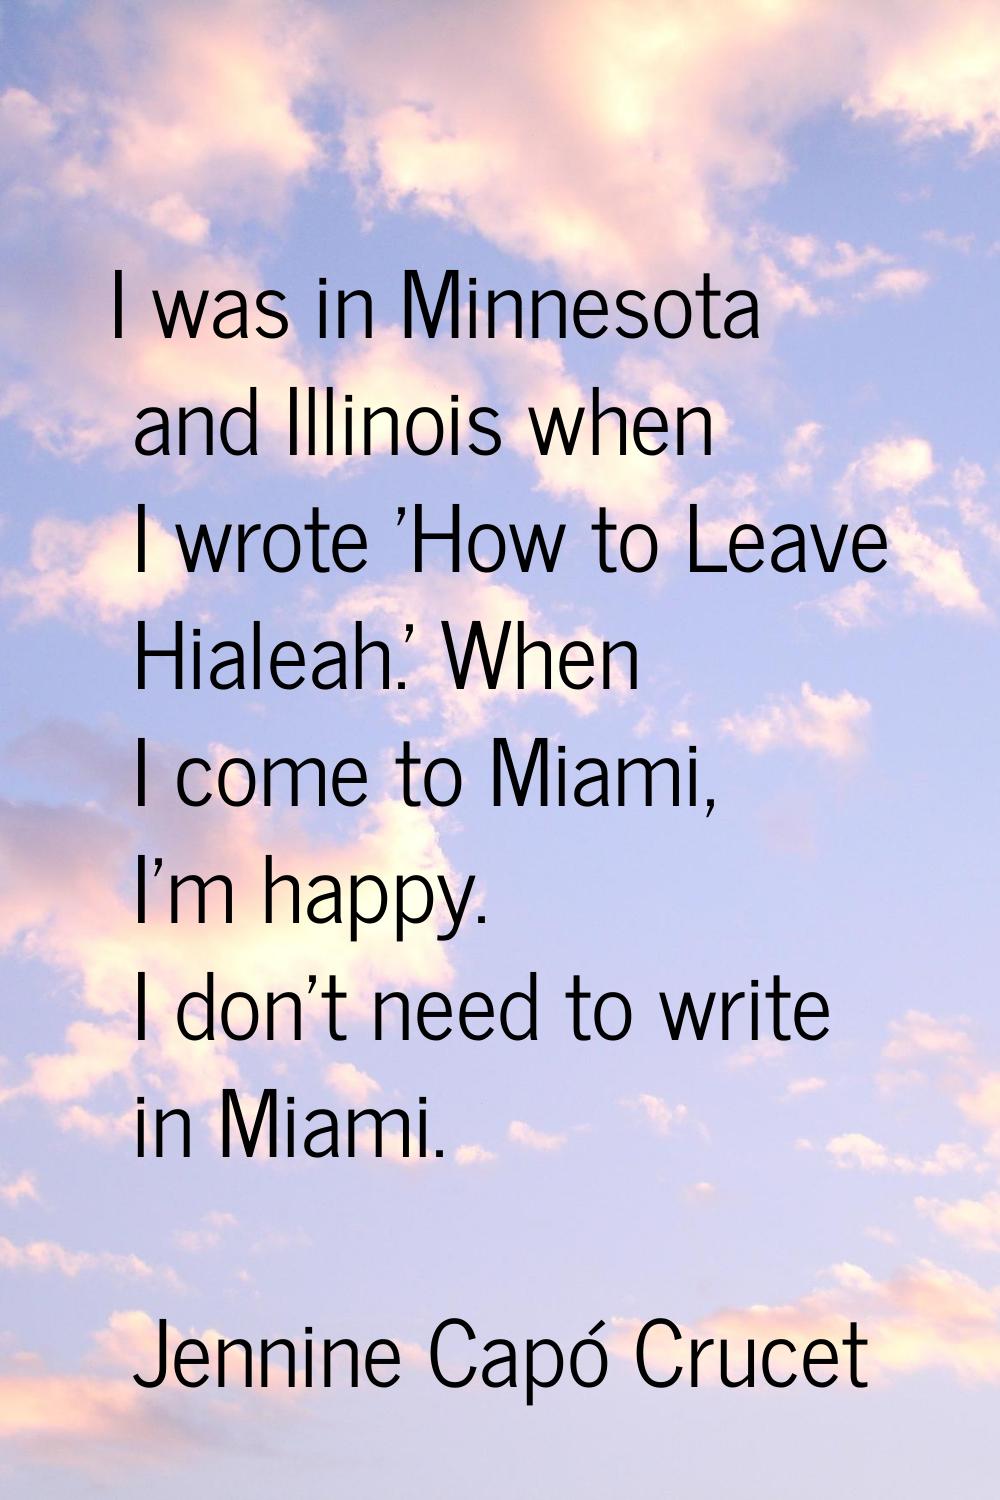 I was in Minnesota and Illinois when I wrote 'How to Leave Hialeah.' When I come to Miami, I'm happ